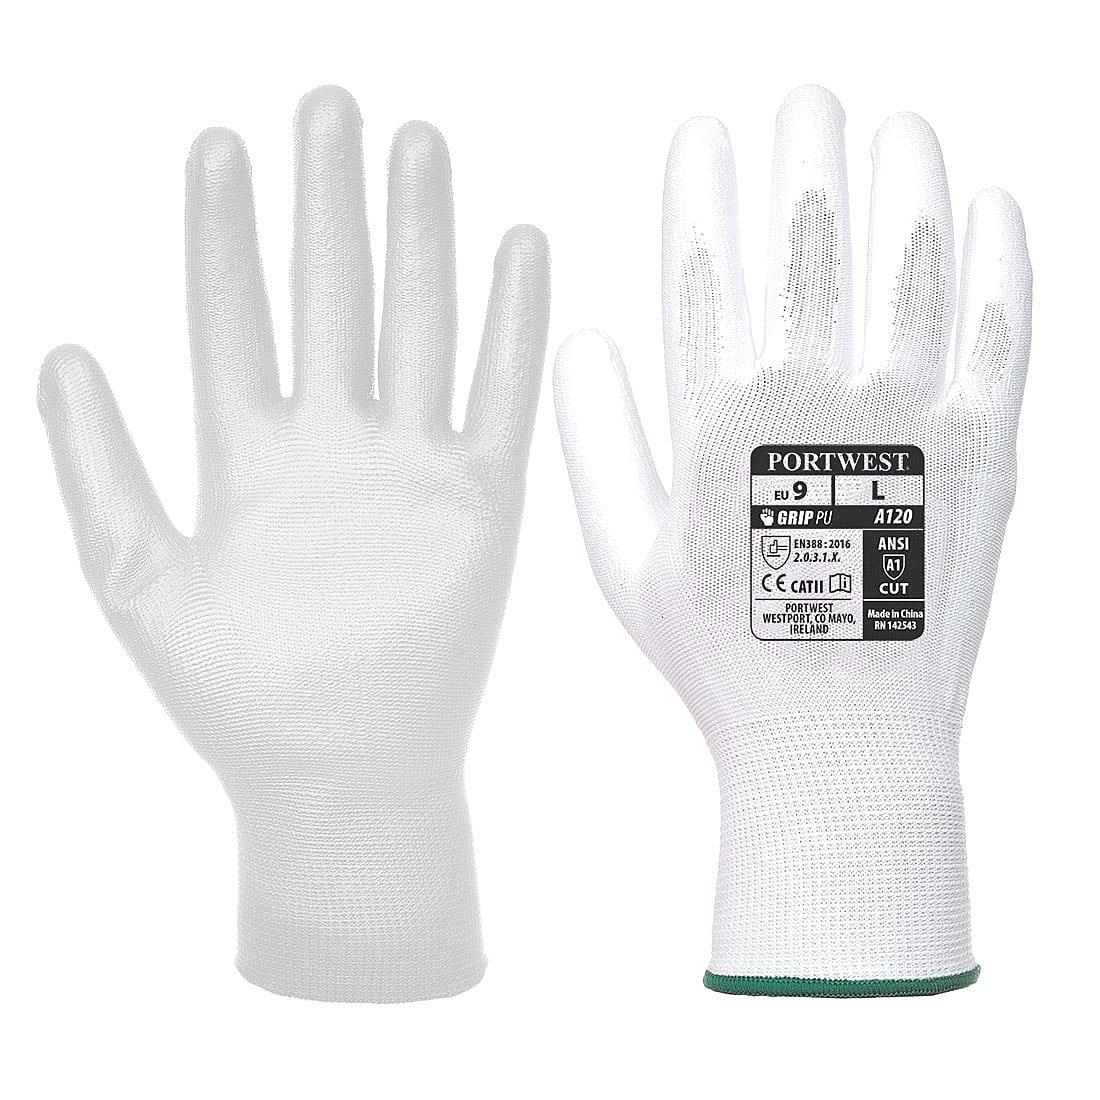 Portwest PU Palm Gloves in White (Product Code: A120)